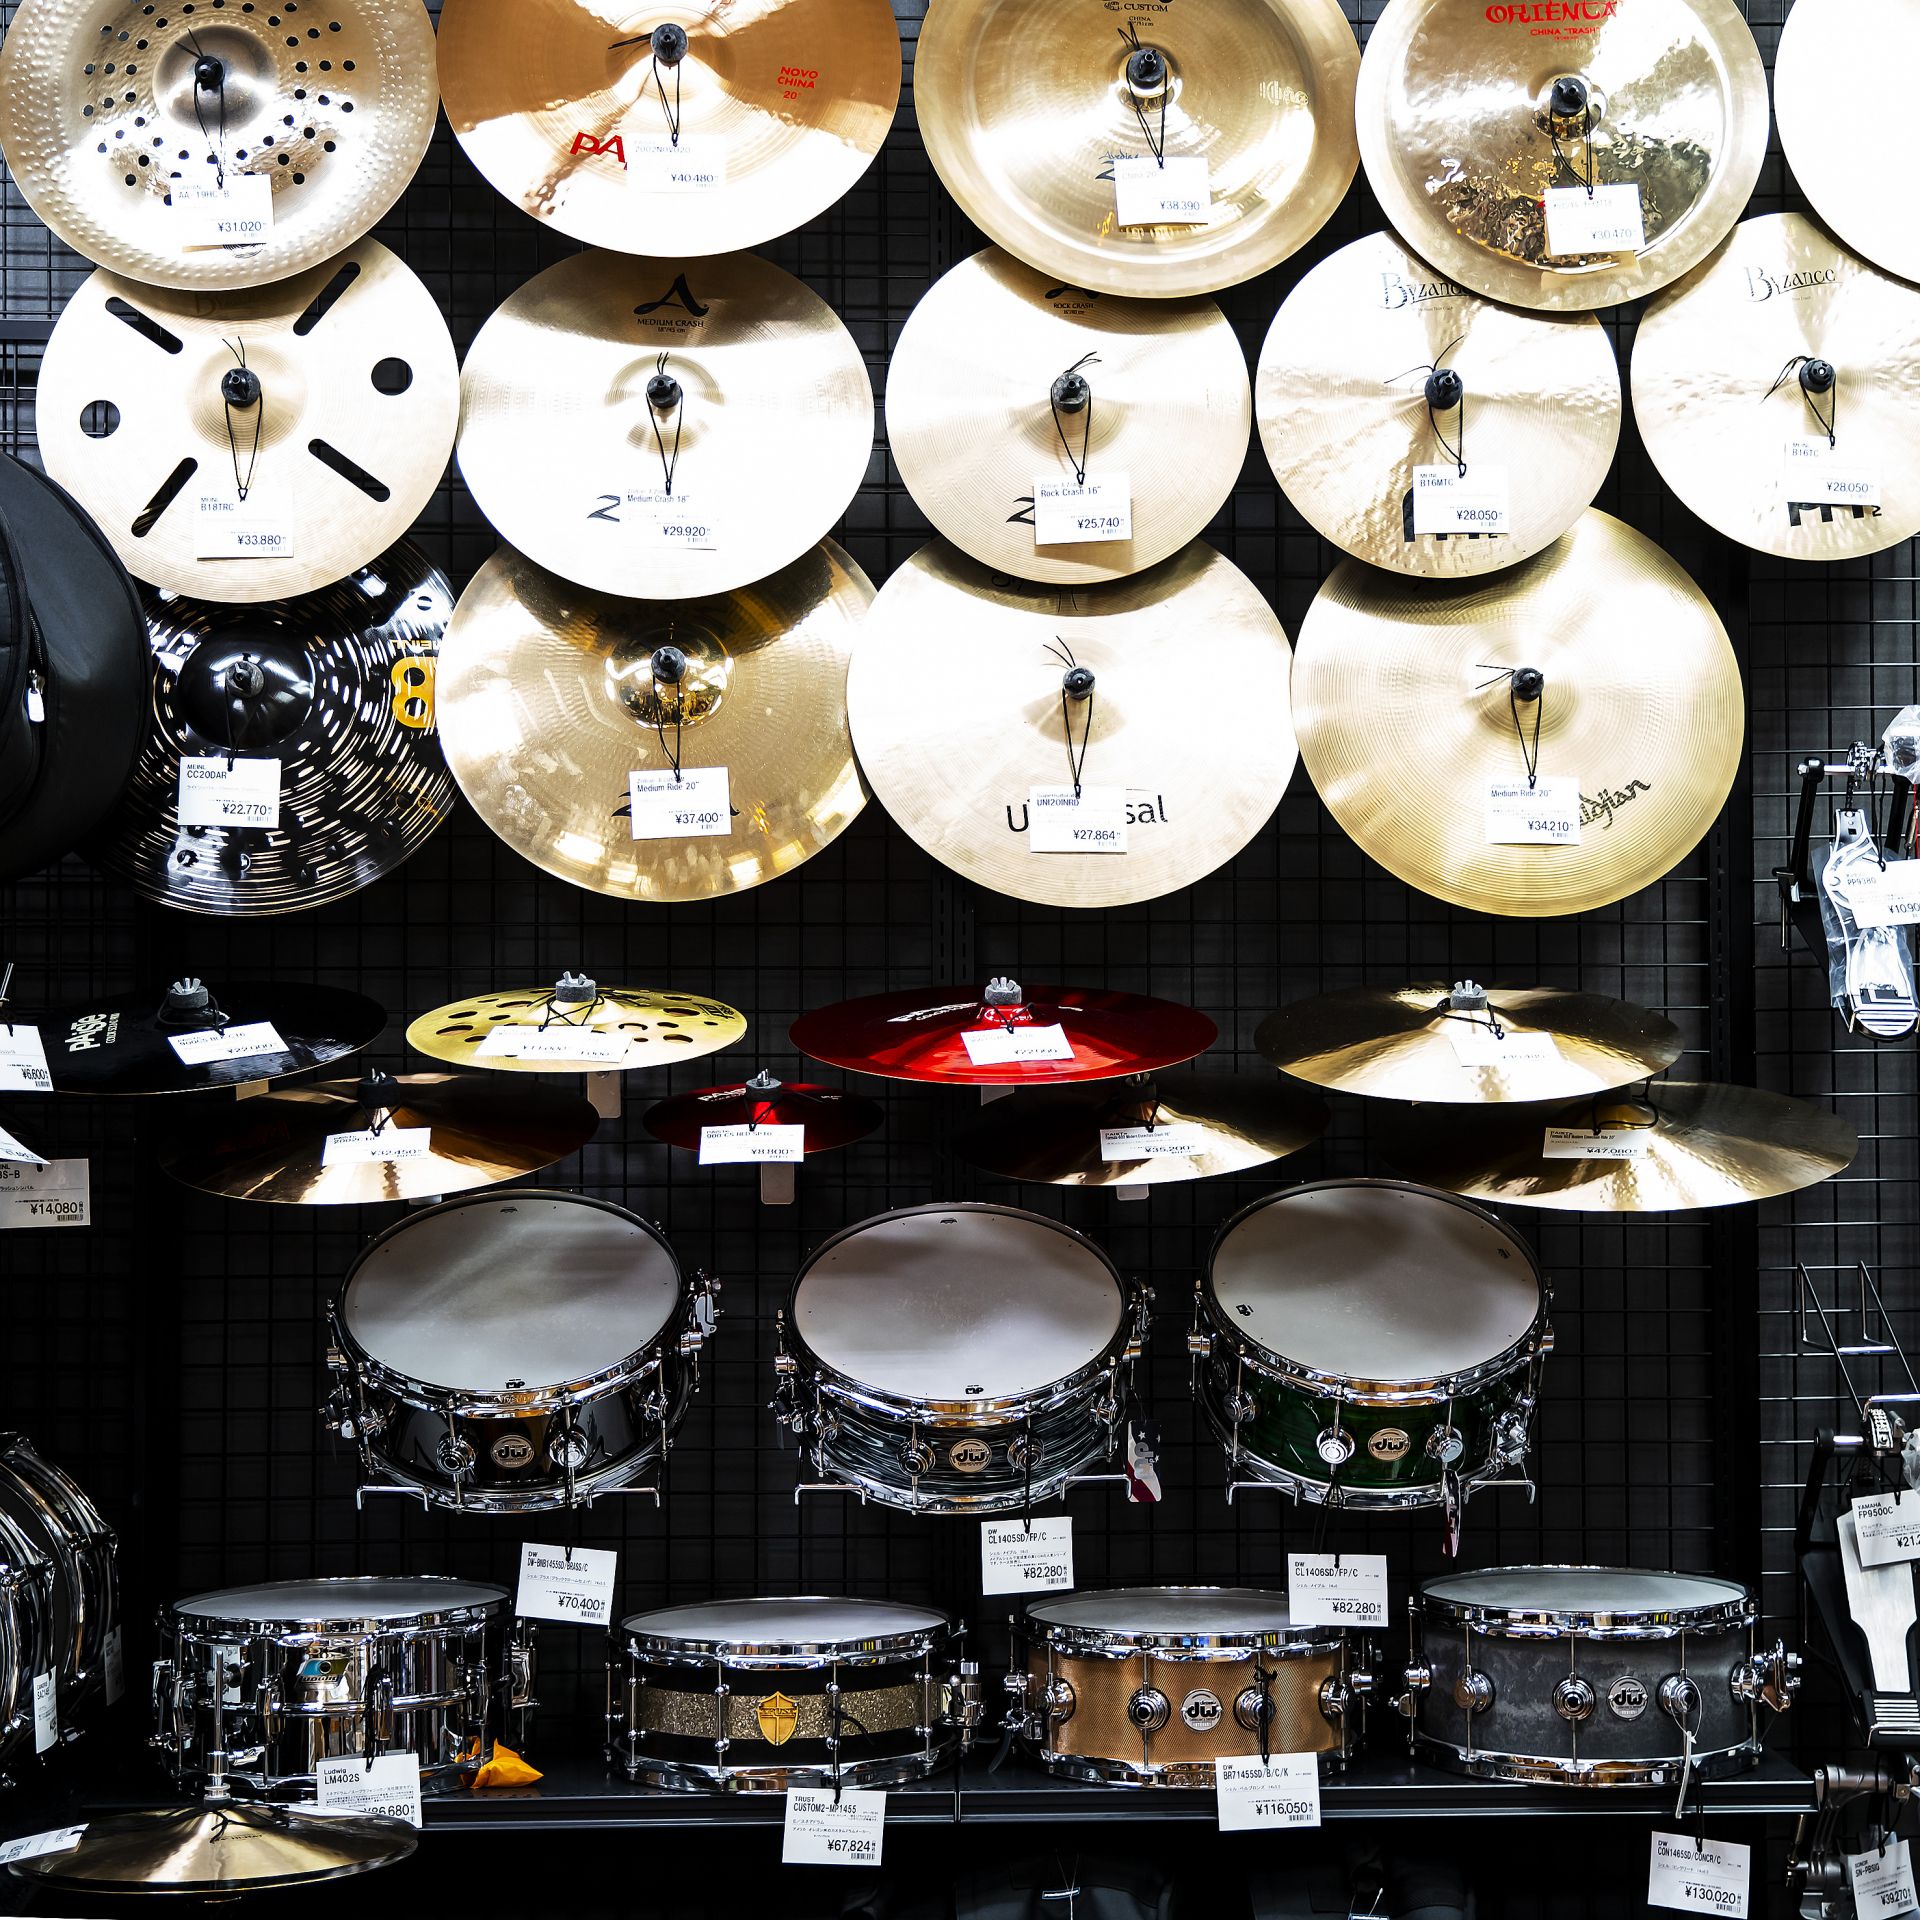 *“Cymbals & Snares SHOWCASE 2019” – Supported by the Drums Day – 人気シンバル、スネアを徹底的にフィーチャーするCymbals & Snares SHOWCASE 2019に、島村楽器広島パルコ店も参加します！！ -[https://d […]